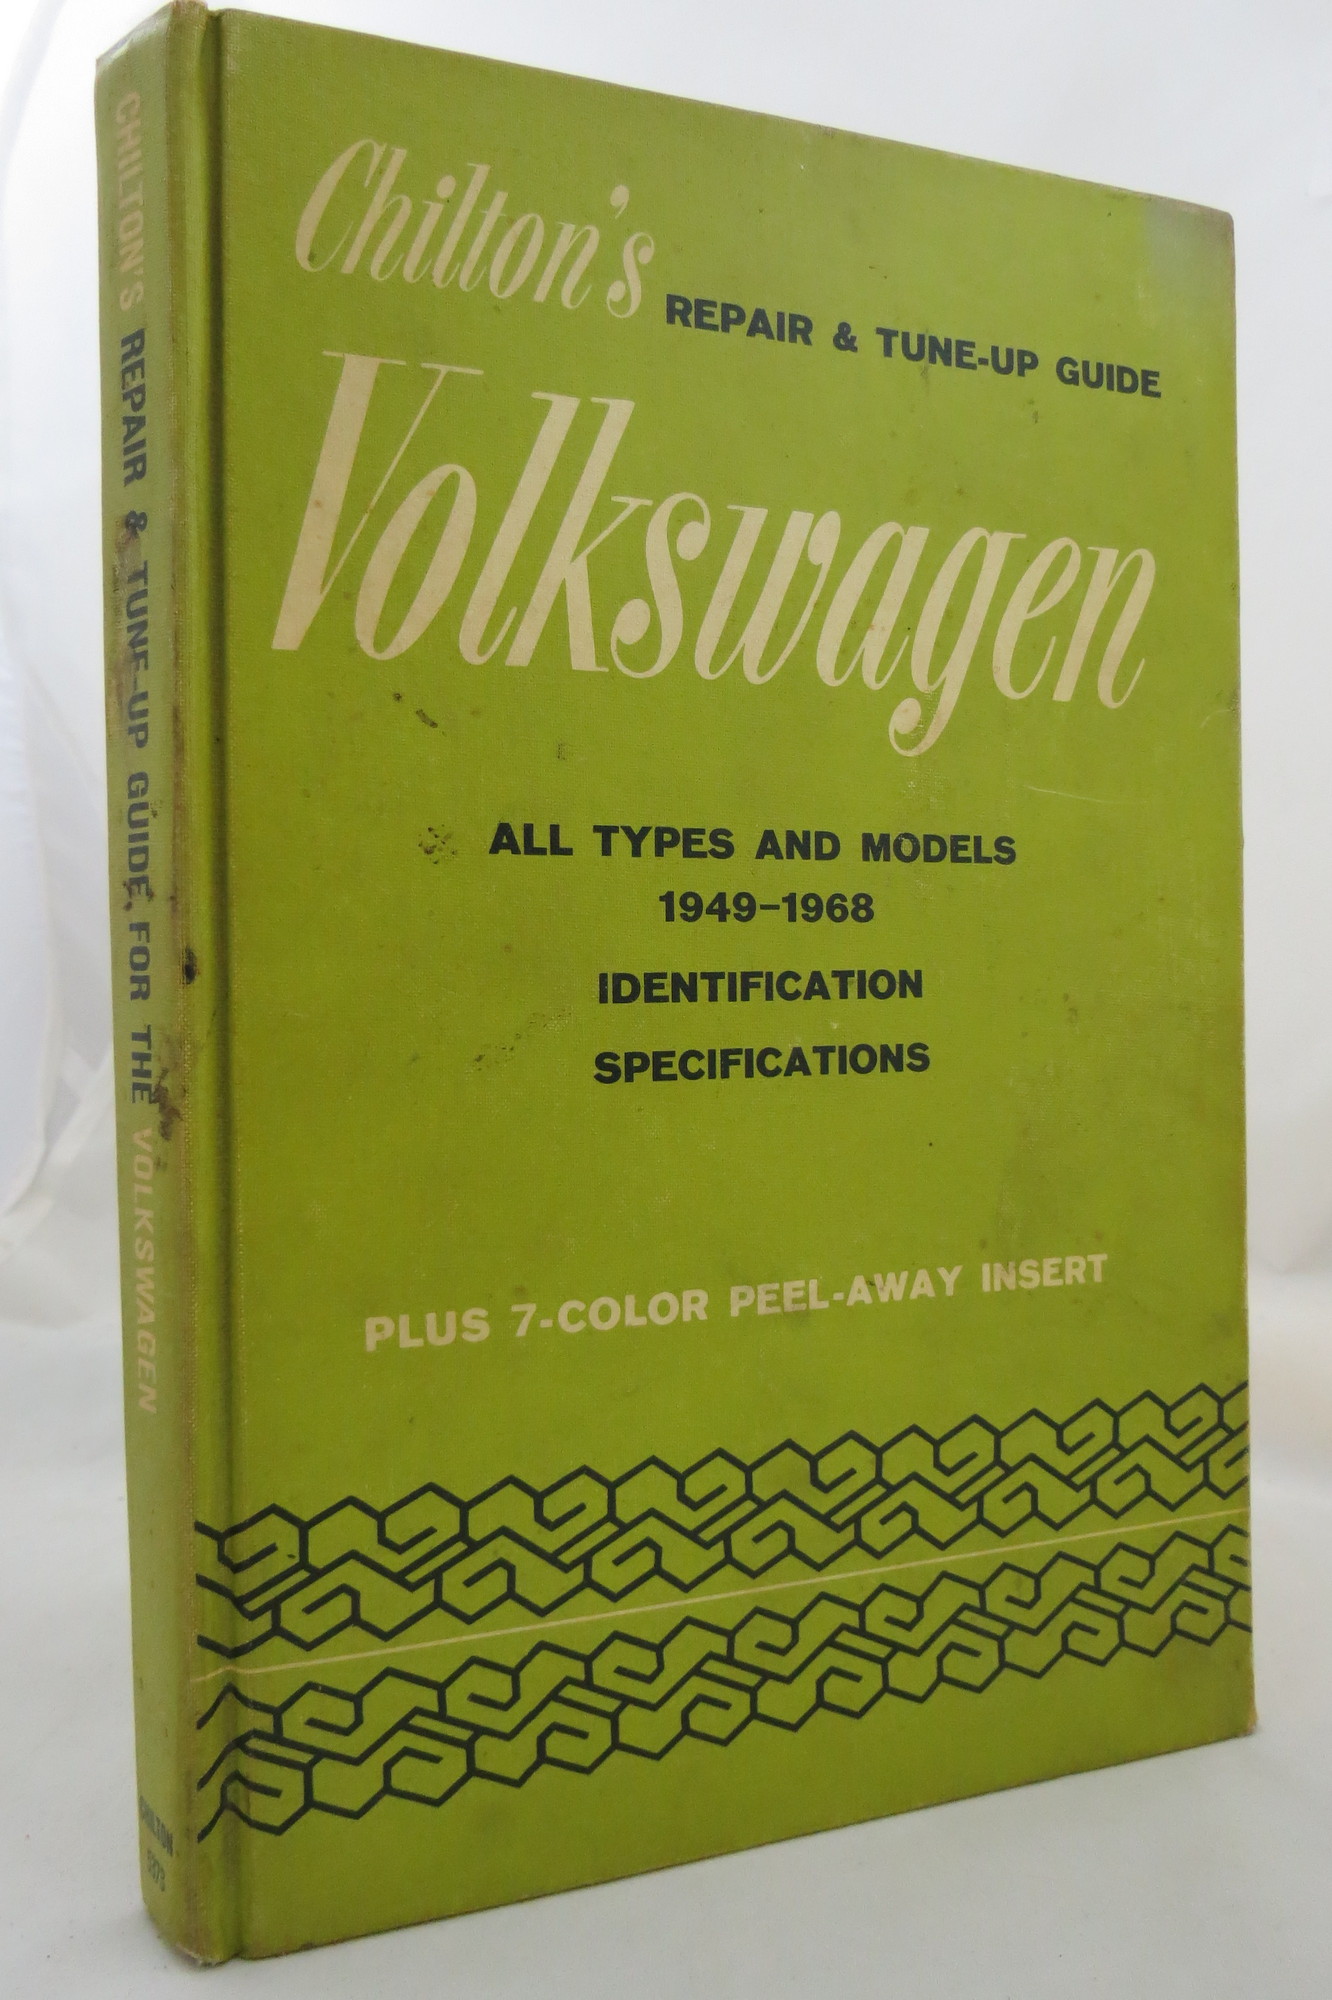 Image for CHILTON'S REPAIR AND TUNE-UP GUIDE FOR THE VOLKSWAGEN ILLUSTRATED- ALL TYPES AND MODELS 1949-1968 IDENTIFICATION, SPECIFICATIONS, PLUS 7- COLOR PEEL-AWAY INSERT